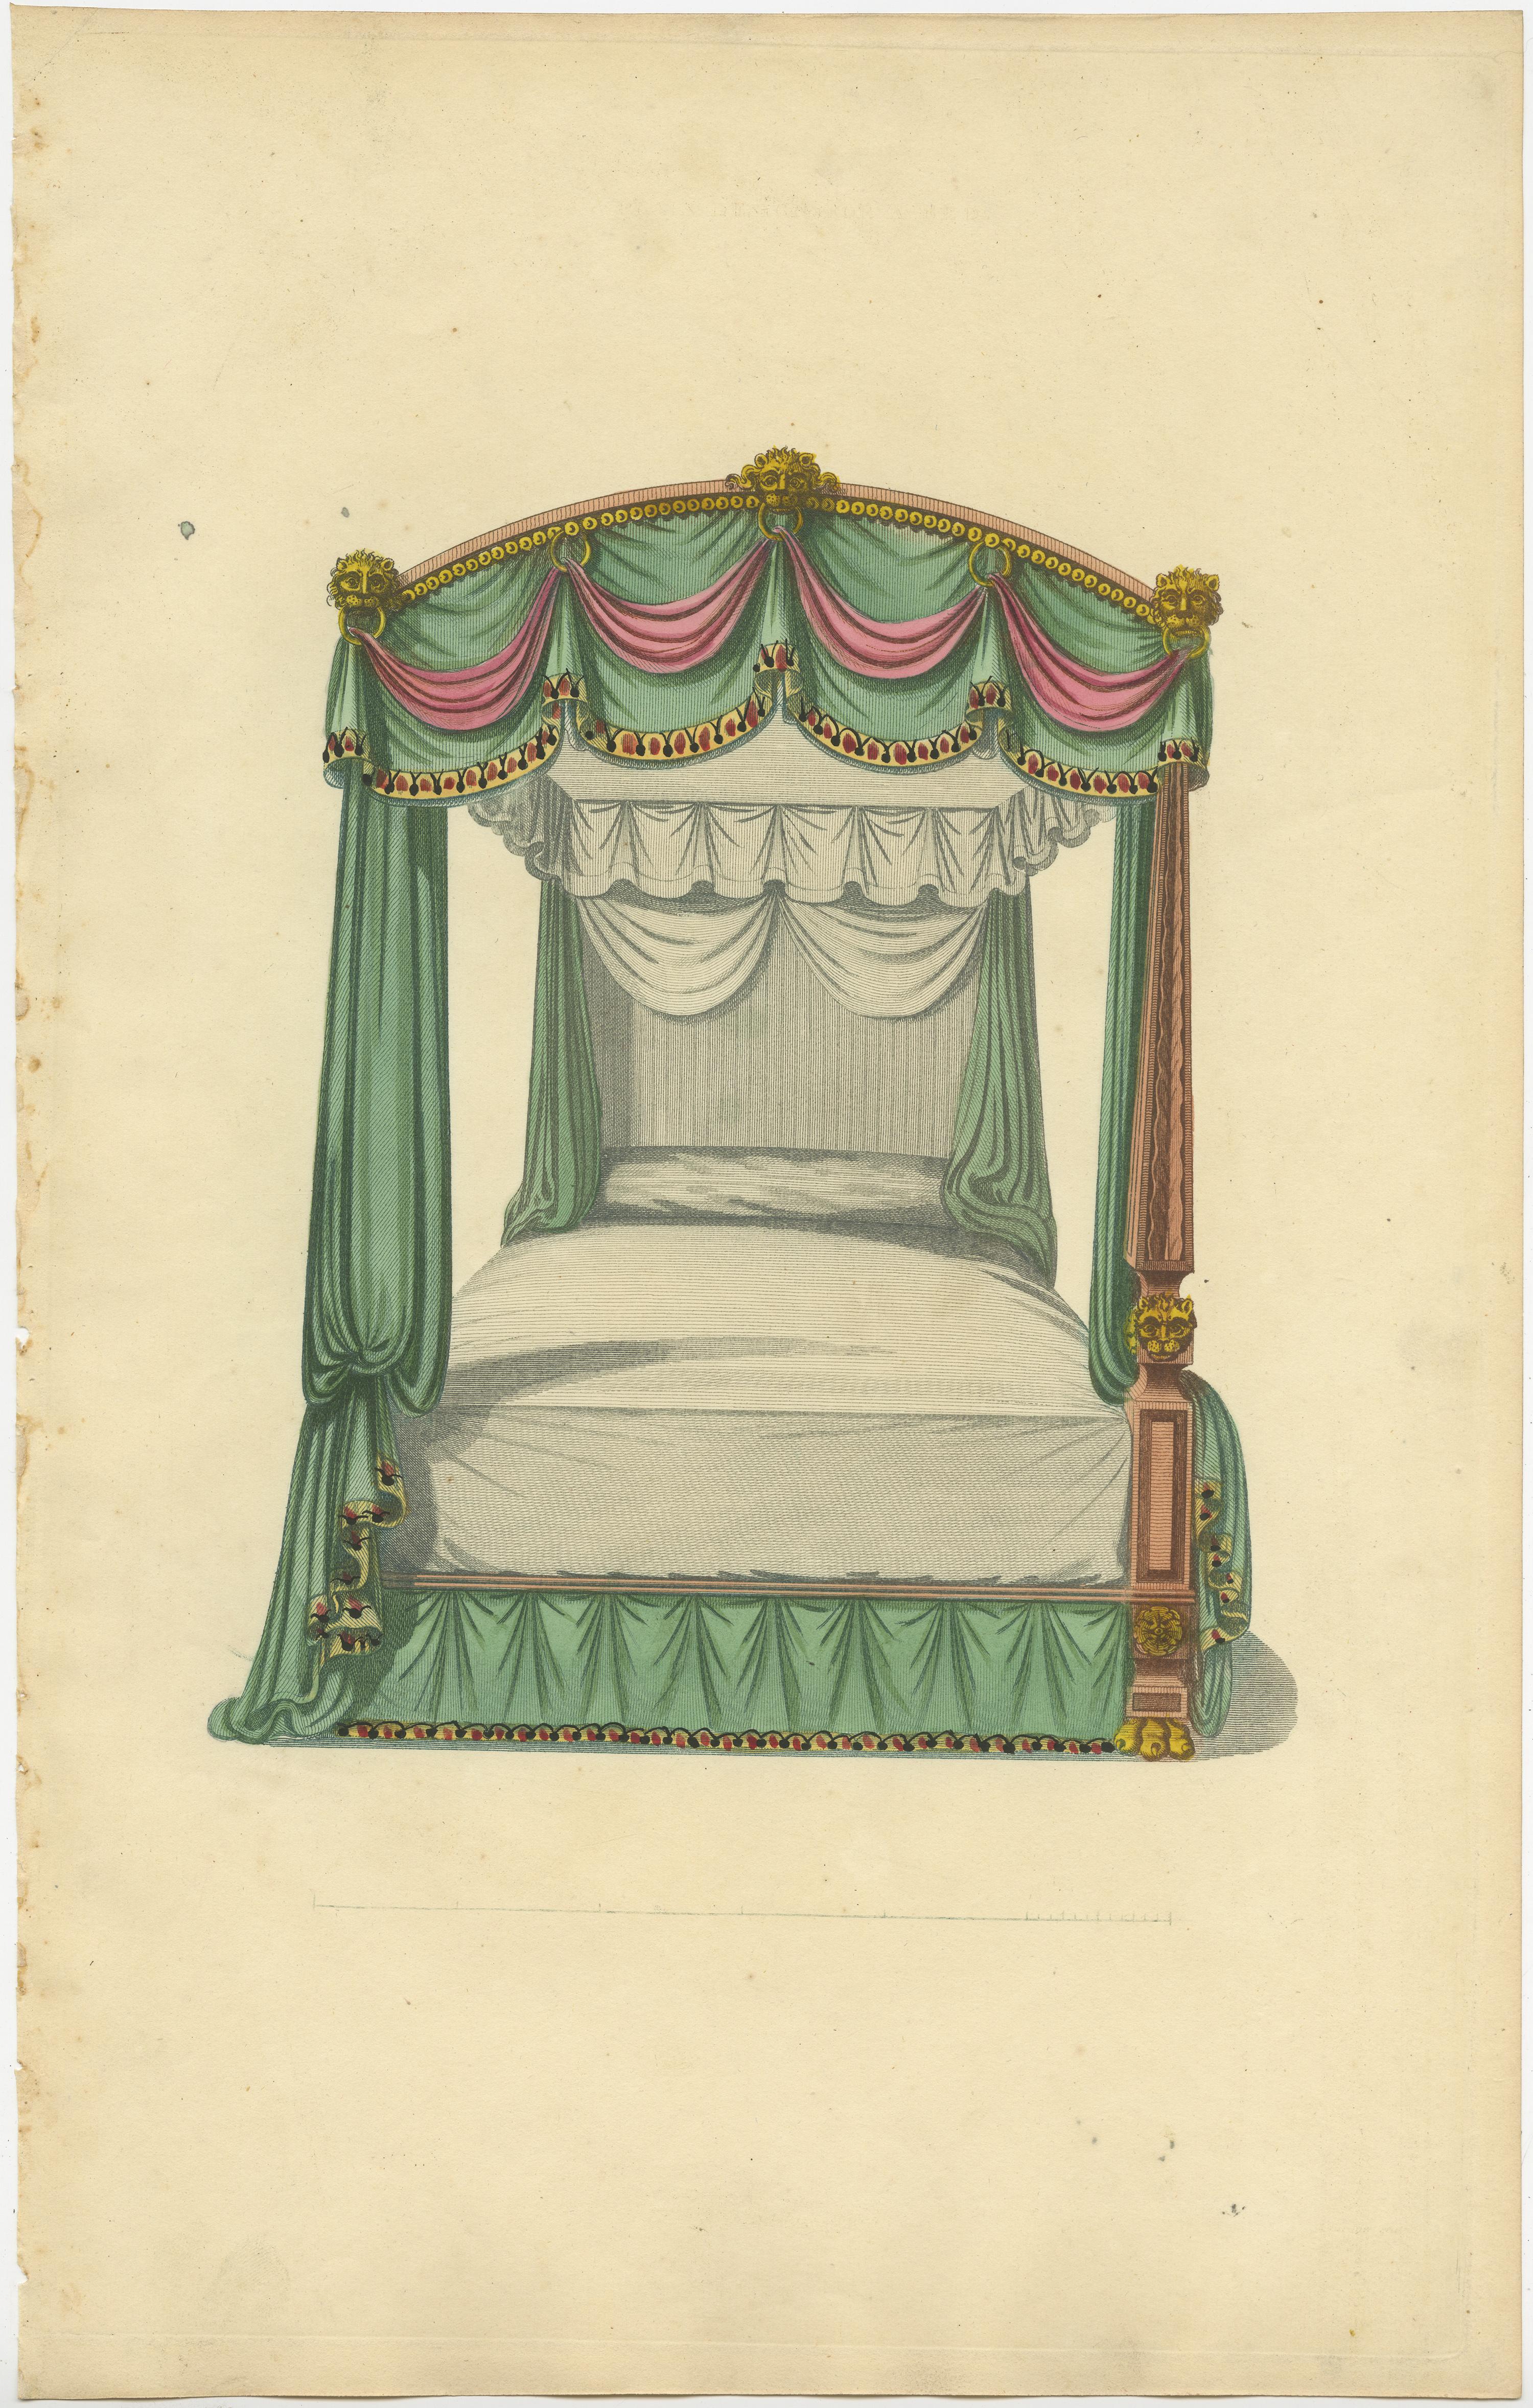 Set of 7 Antique Prints of Beds with Drapery by Sheraton '1805' For Sale 1